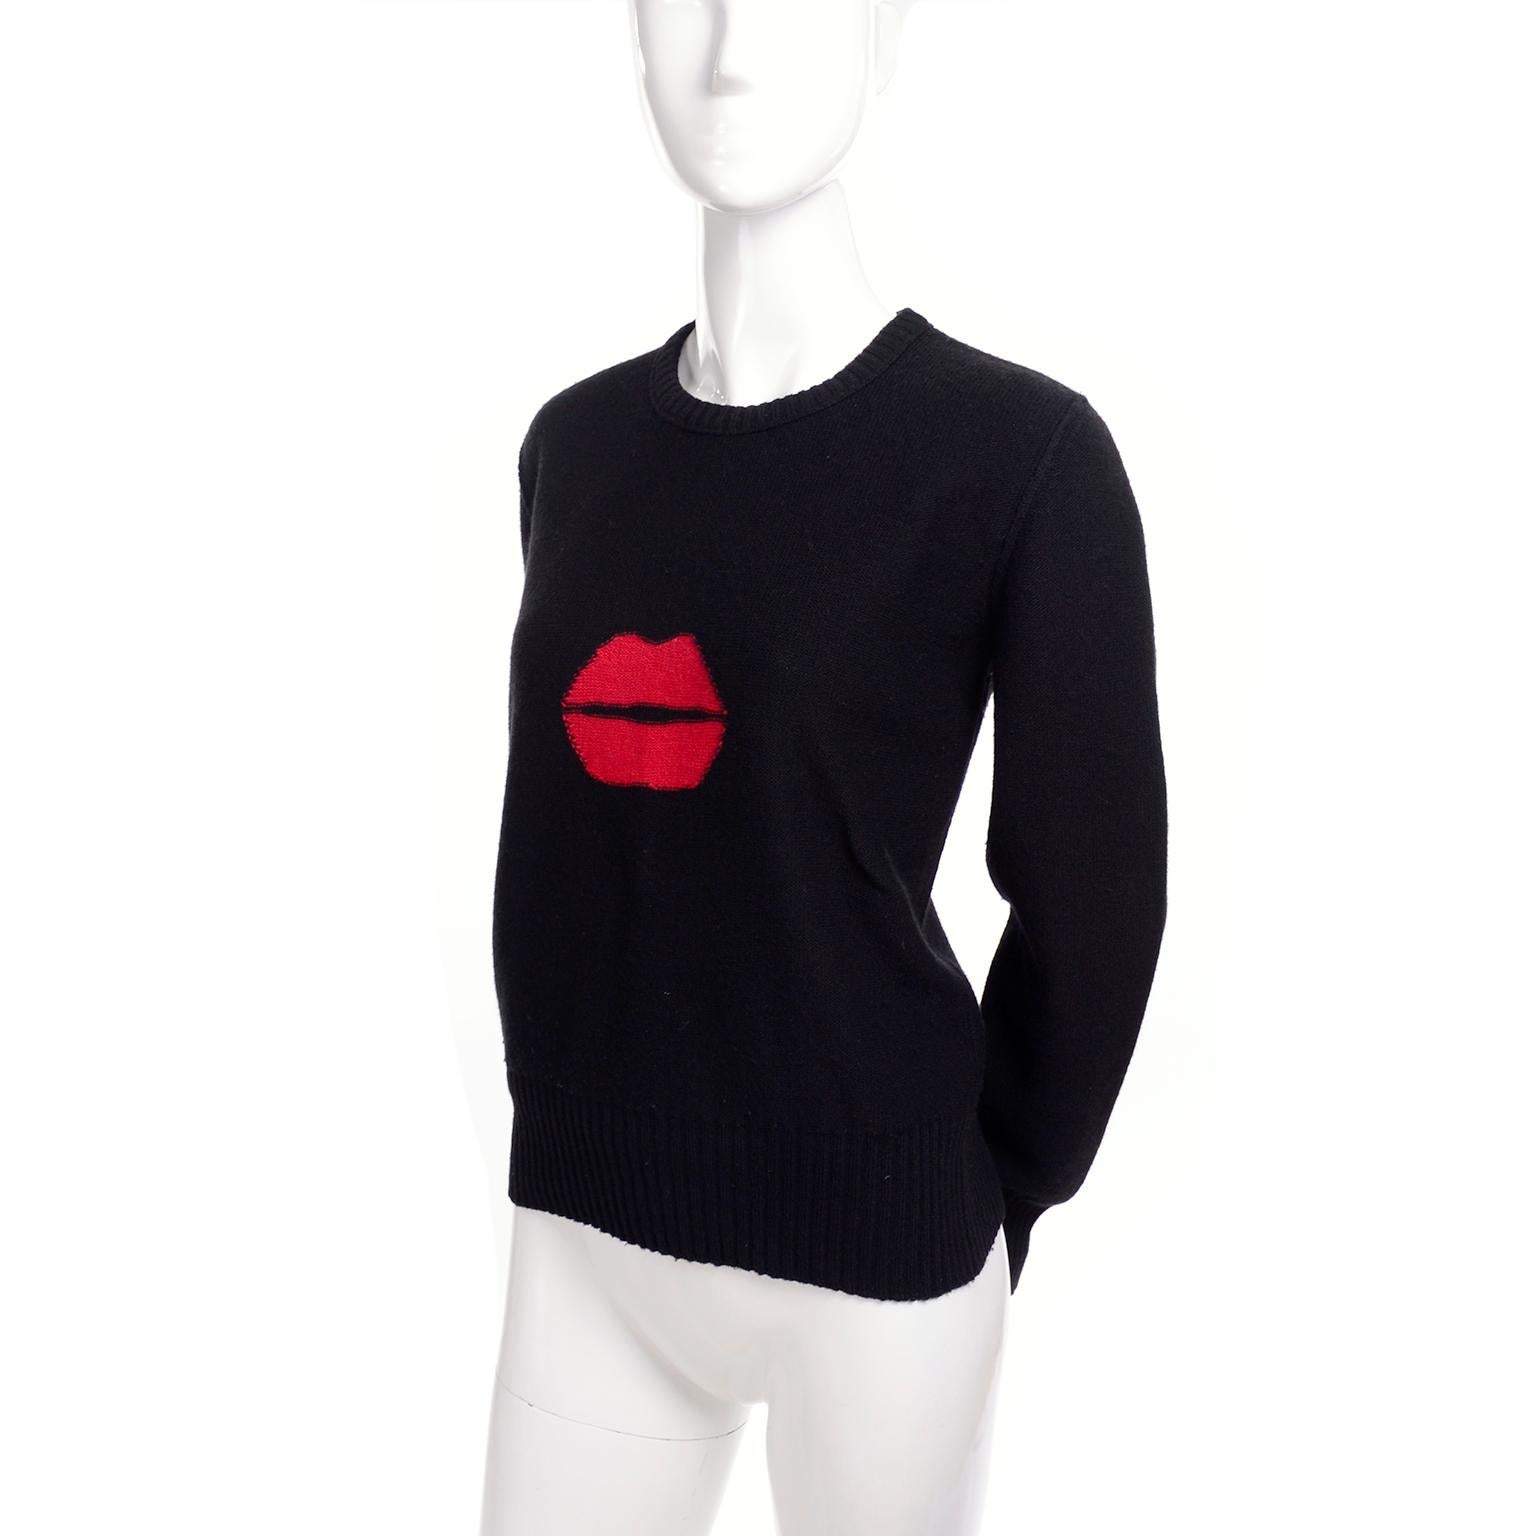 1980s Sonia Rykiel Vintage Black and Red Kiss Sweater in Angora Wool Blend 4